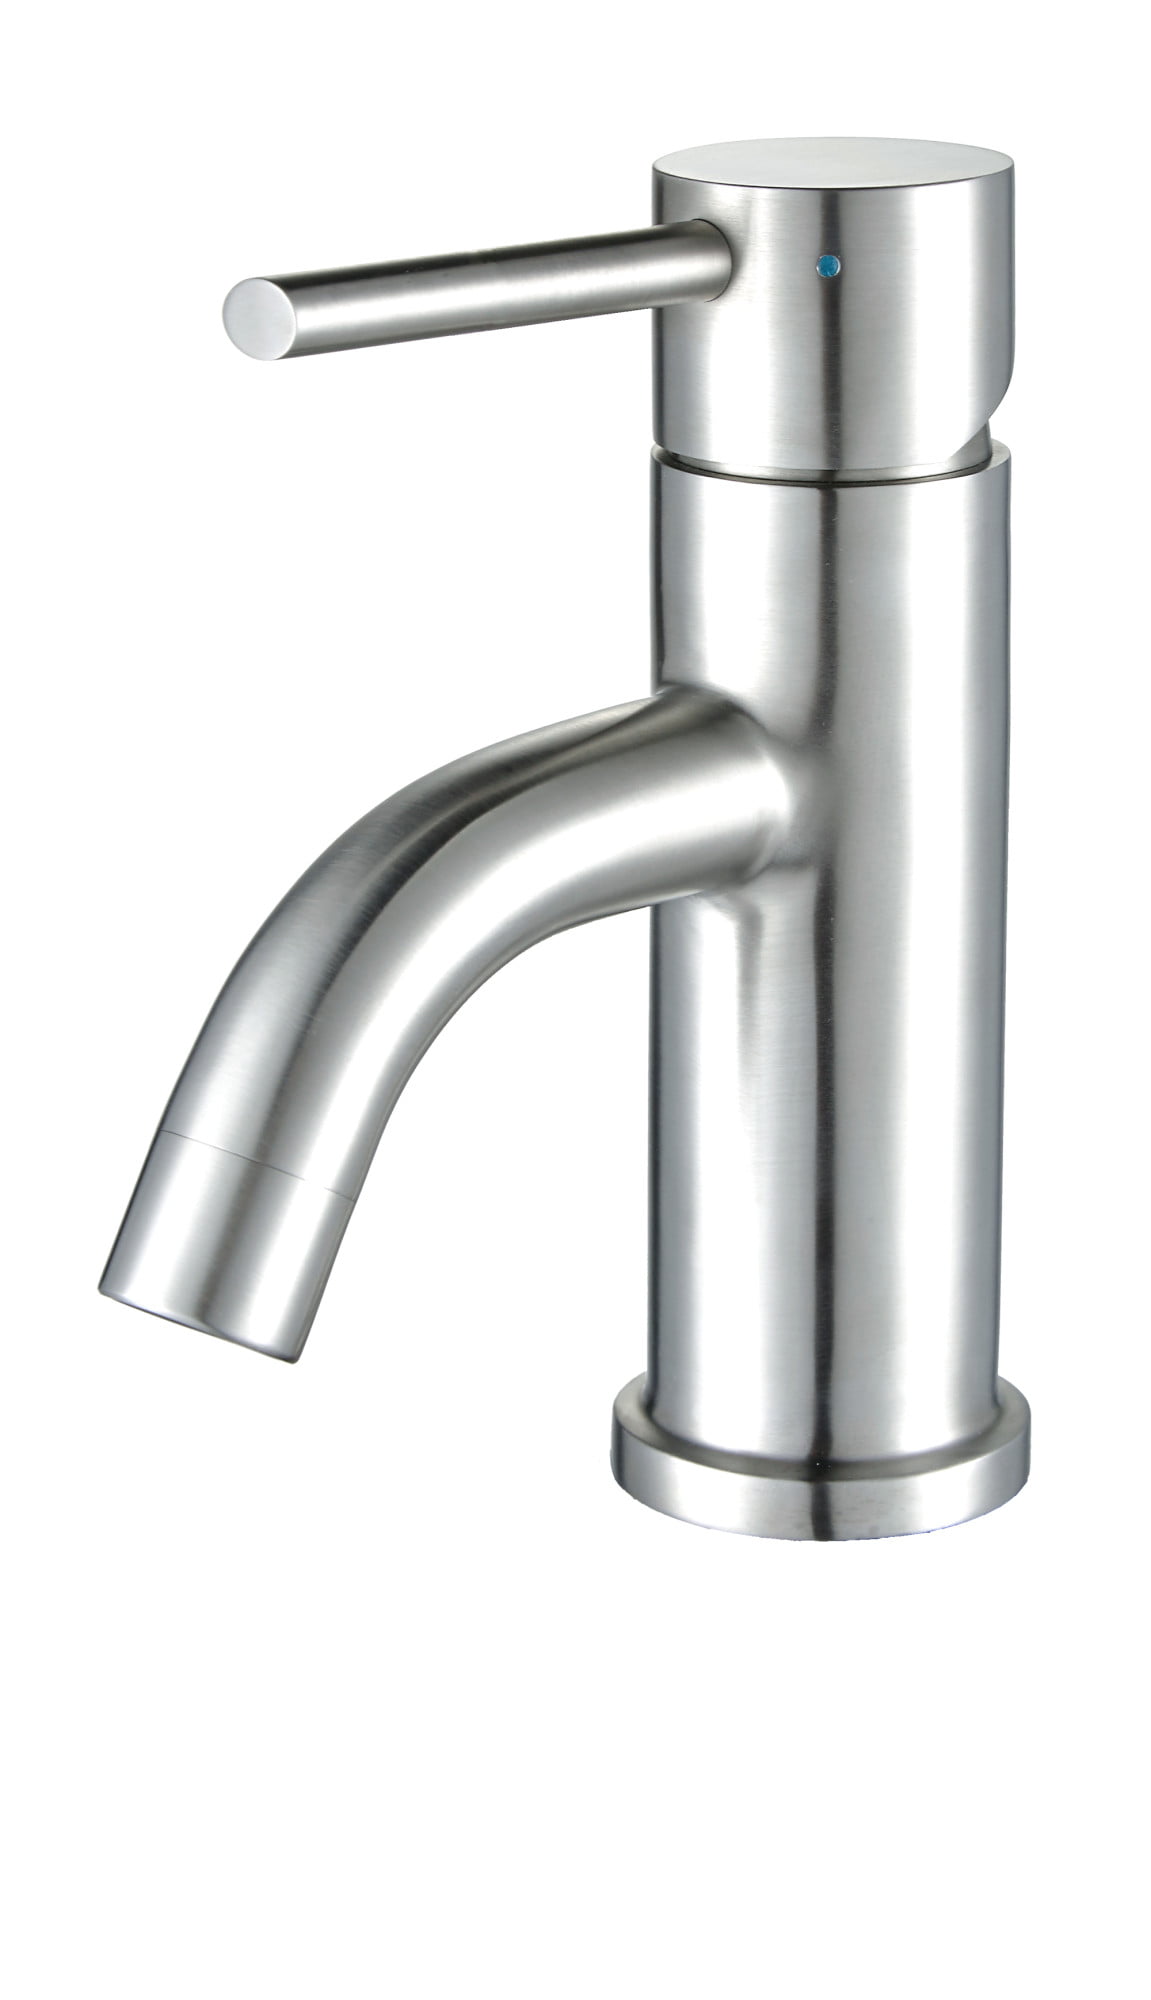 Whs0111sbpss Waterhaus Single Lever Lavatory Faucet In Polished Steel